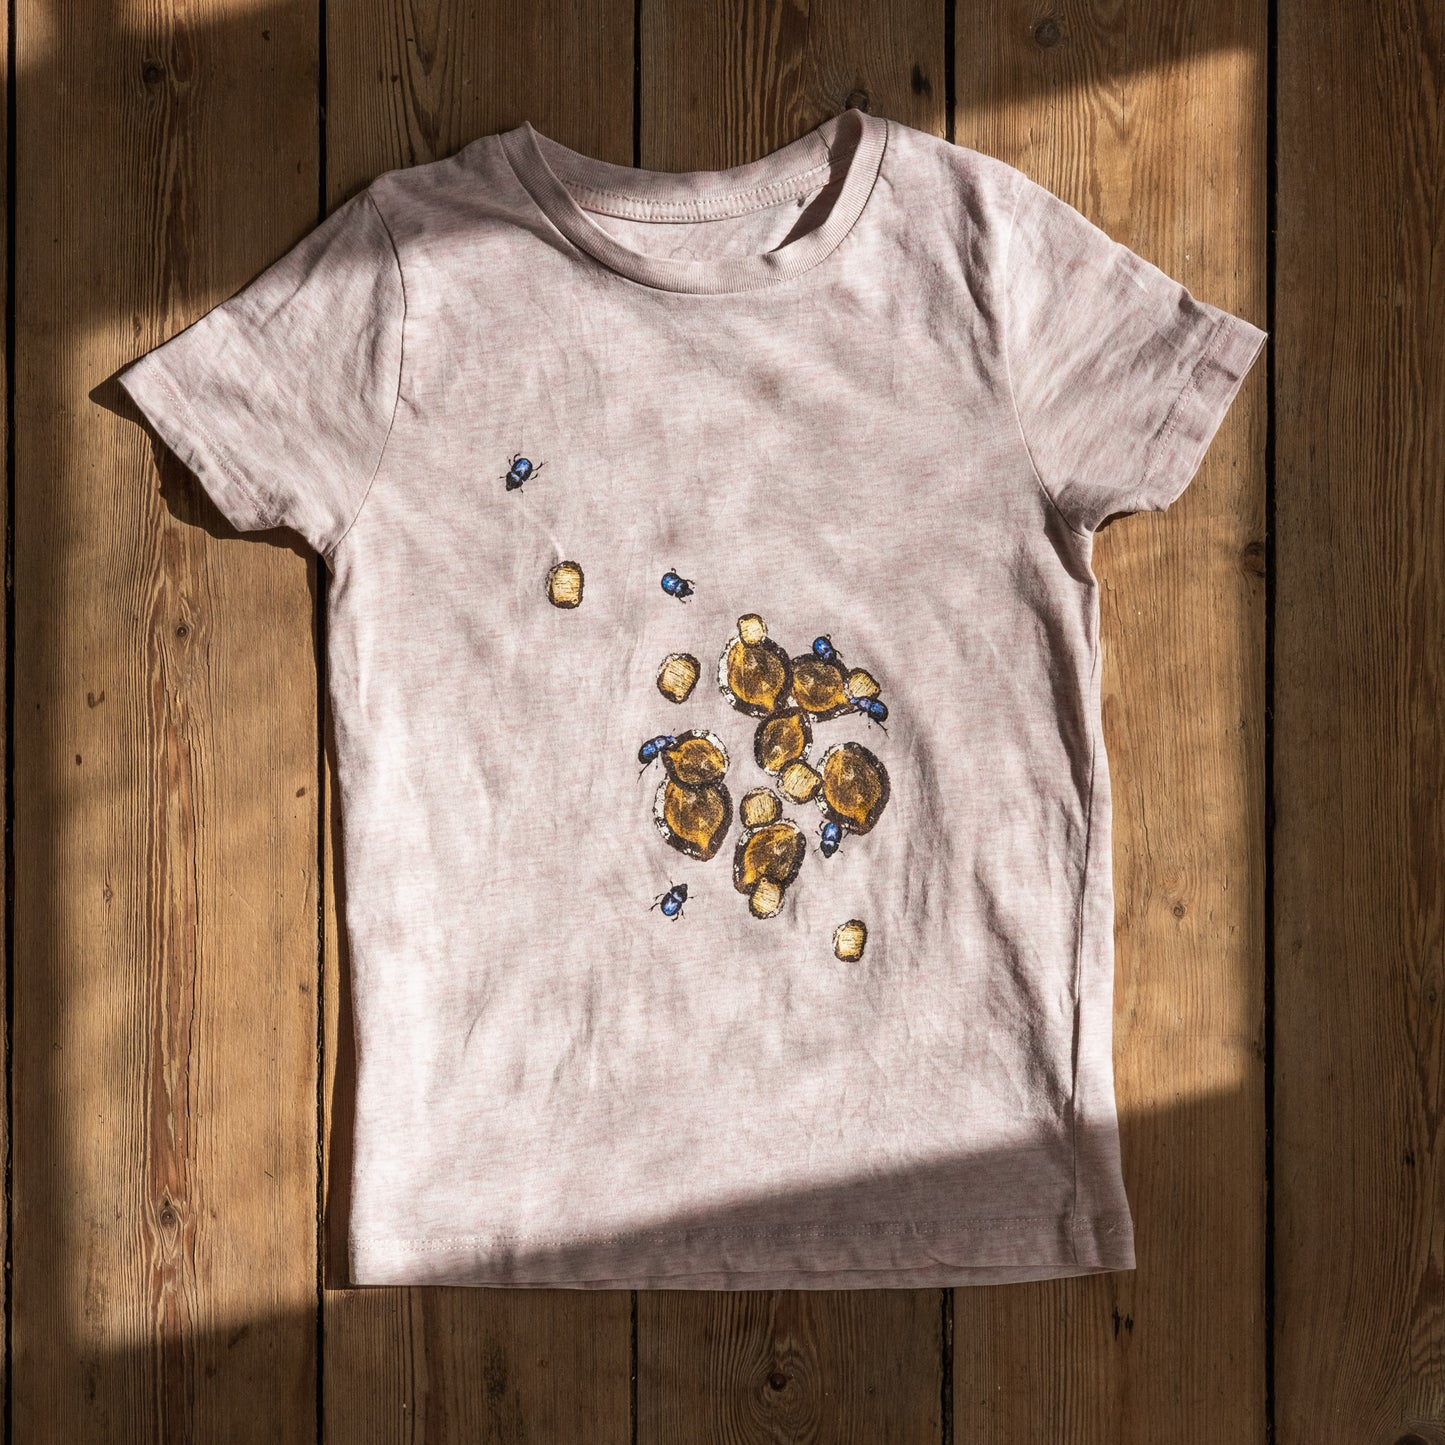 Second hand: Beetles and logs t-shirt